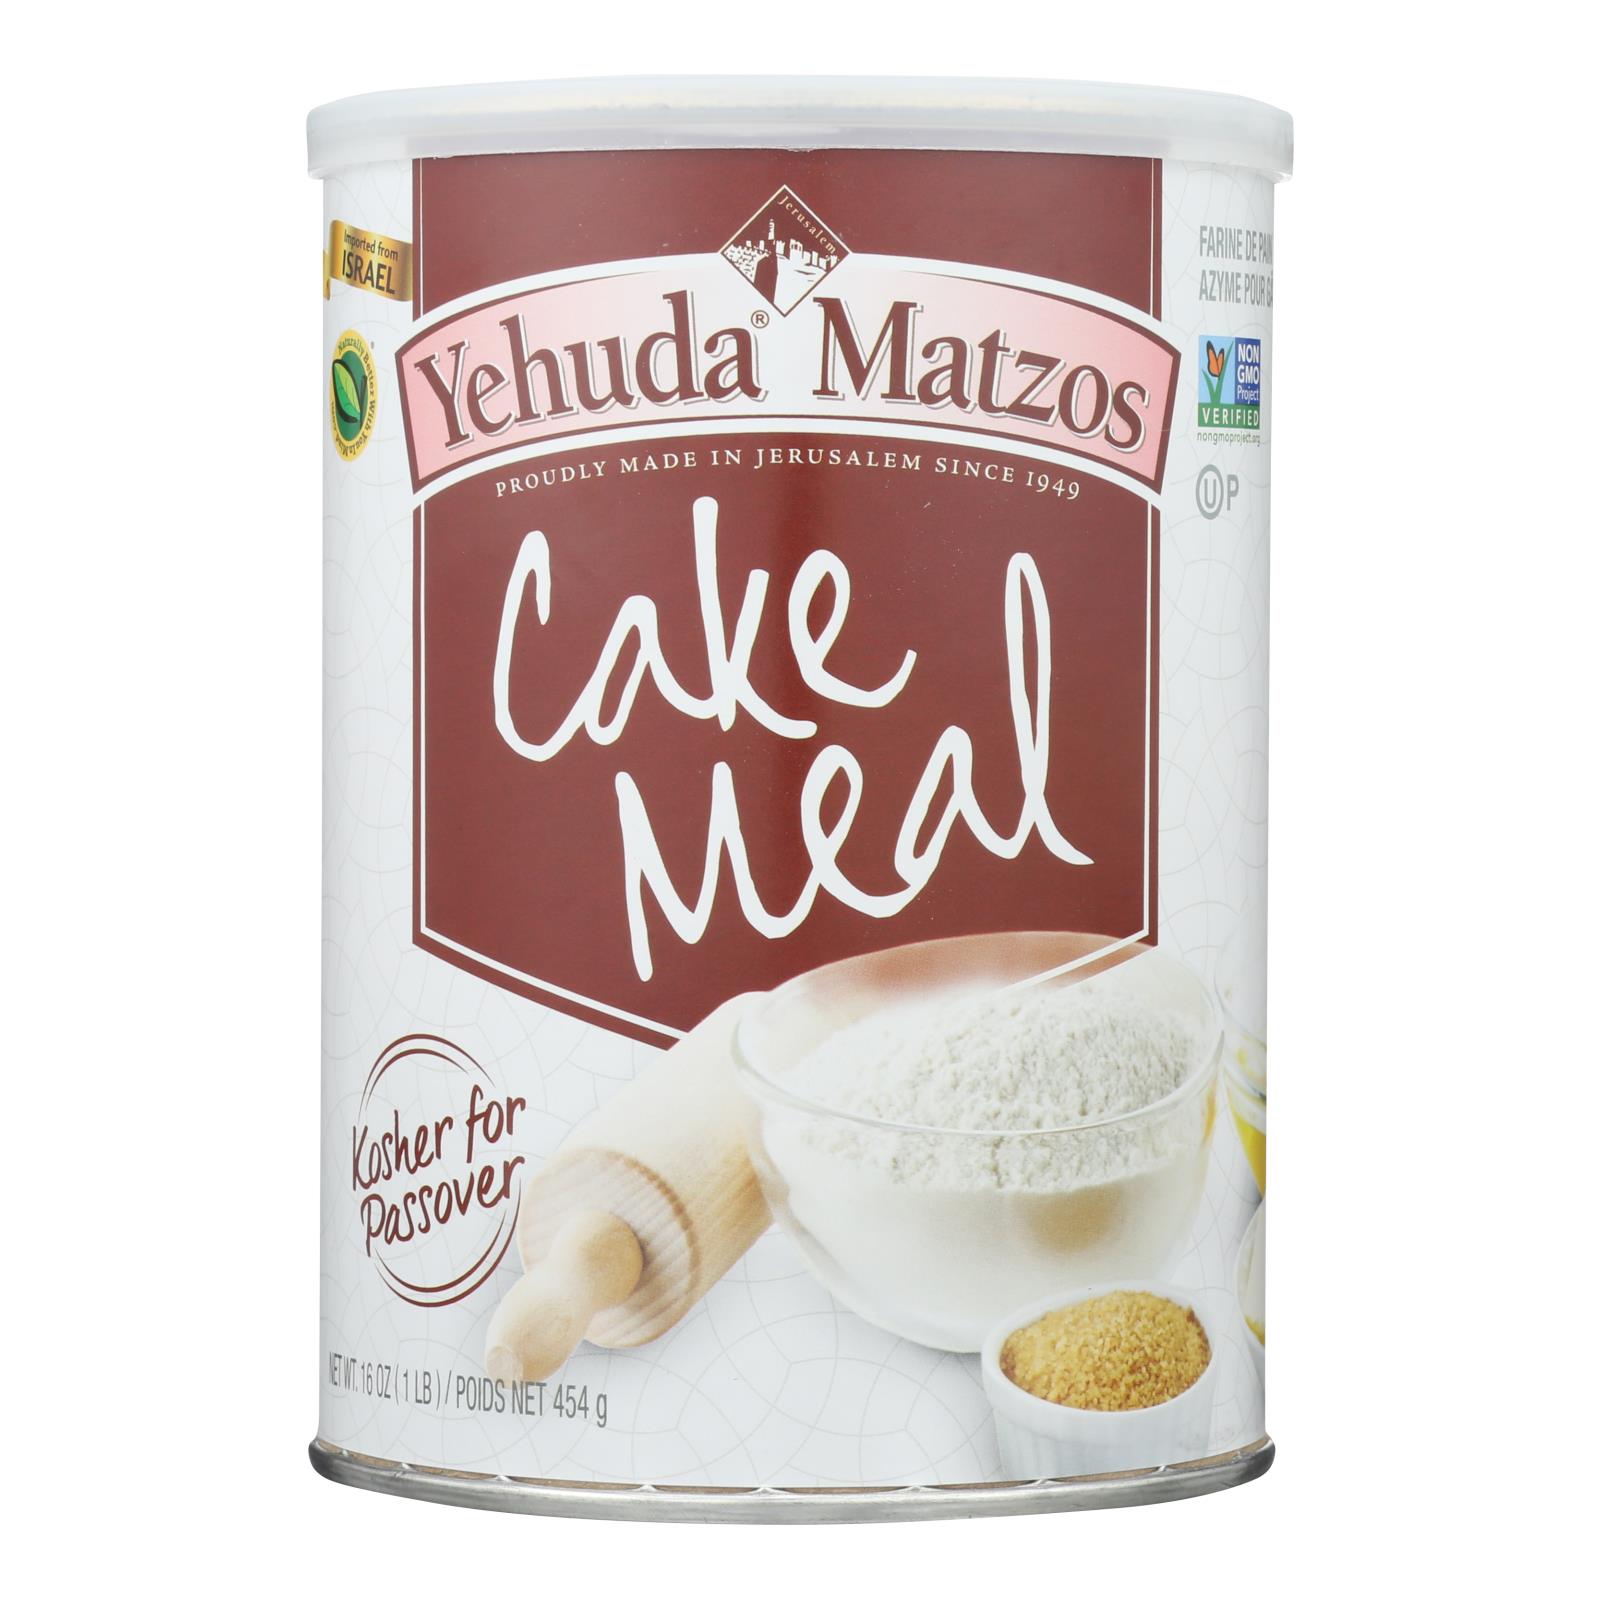 Yehuda - Cake Meal Canister Kosher for Passover - 12개 묶음상품 - 16 OZ